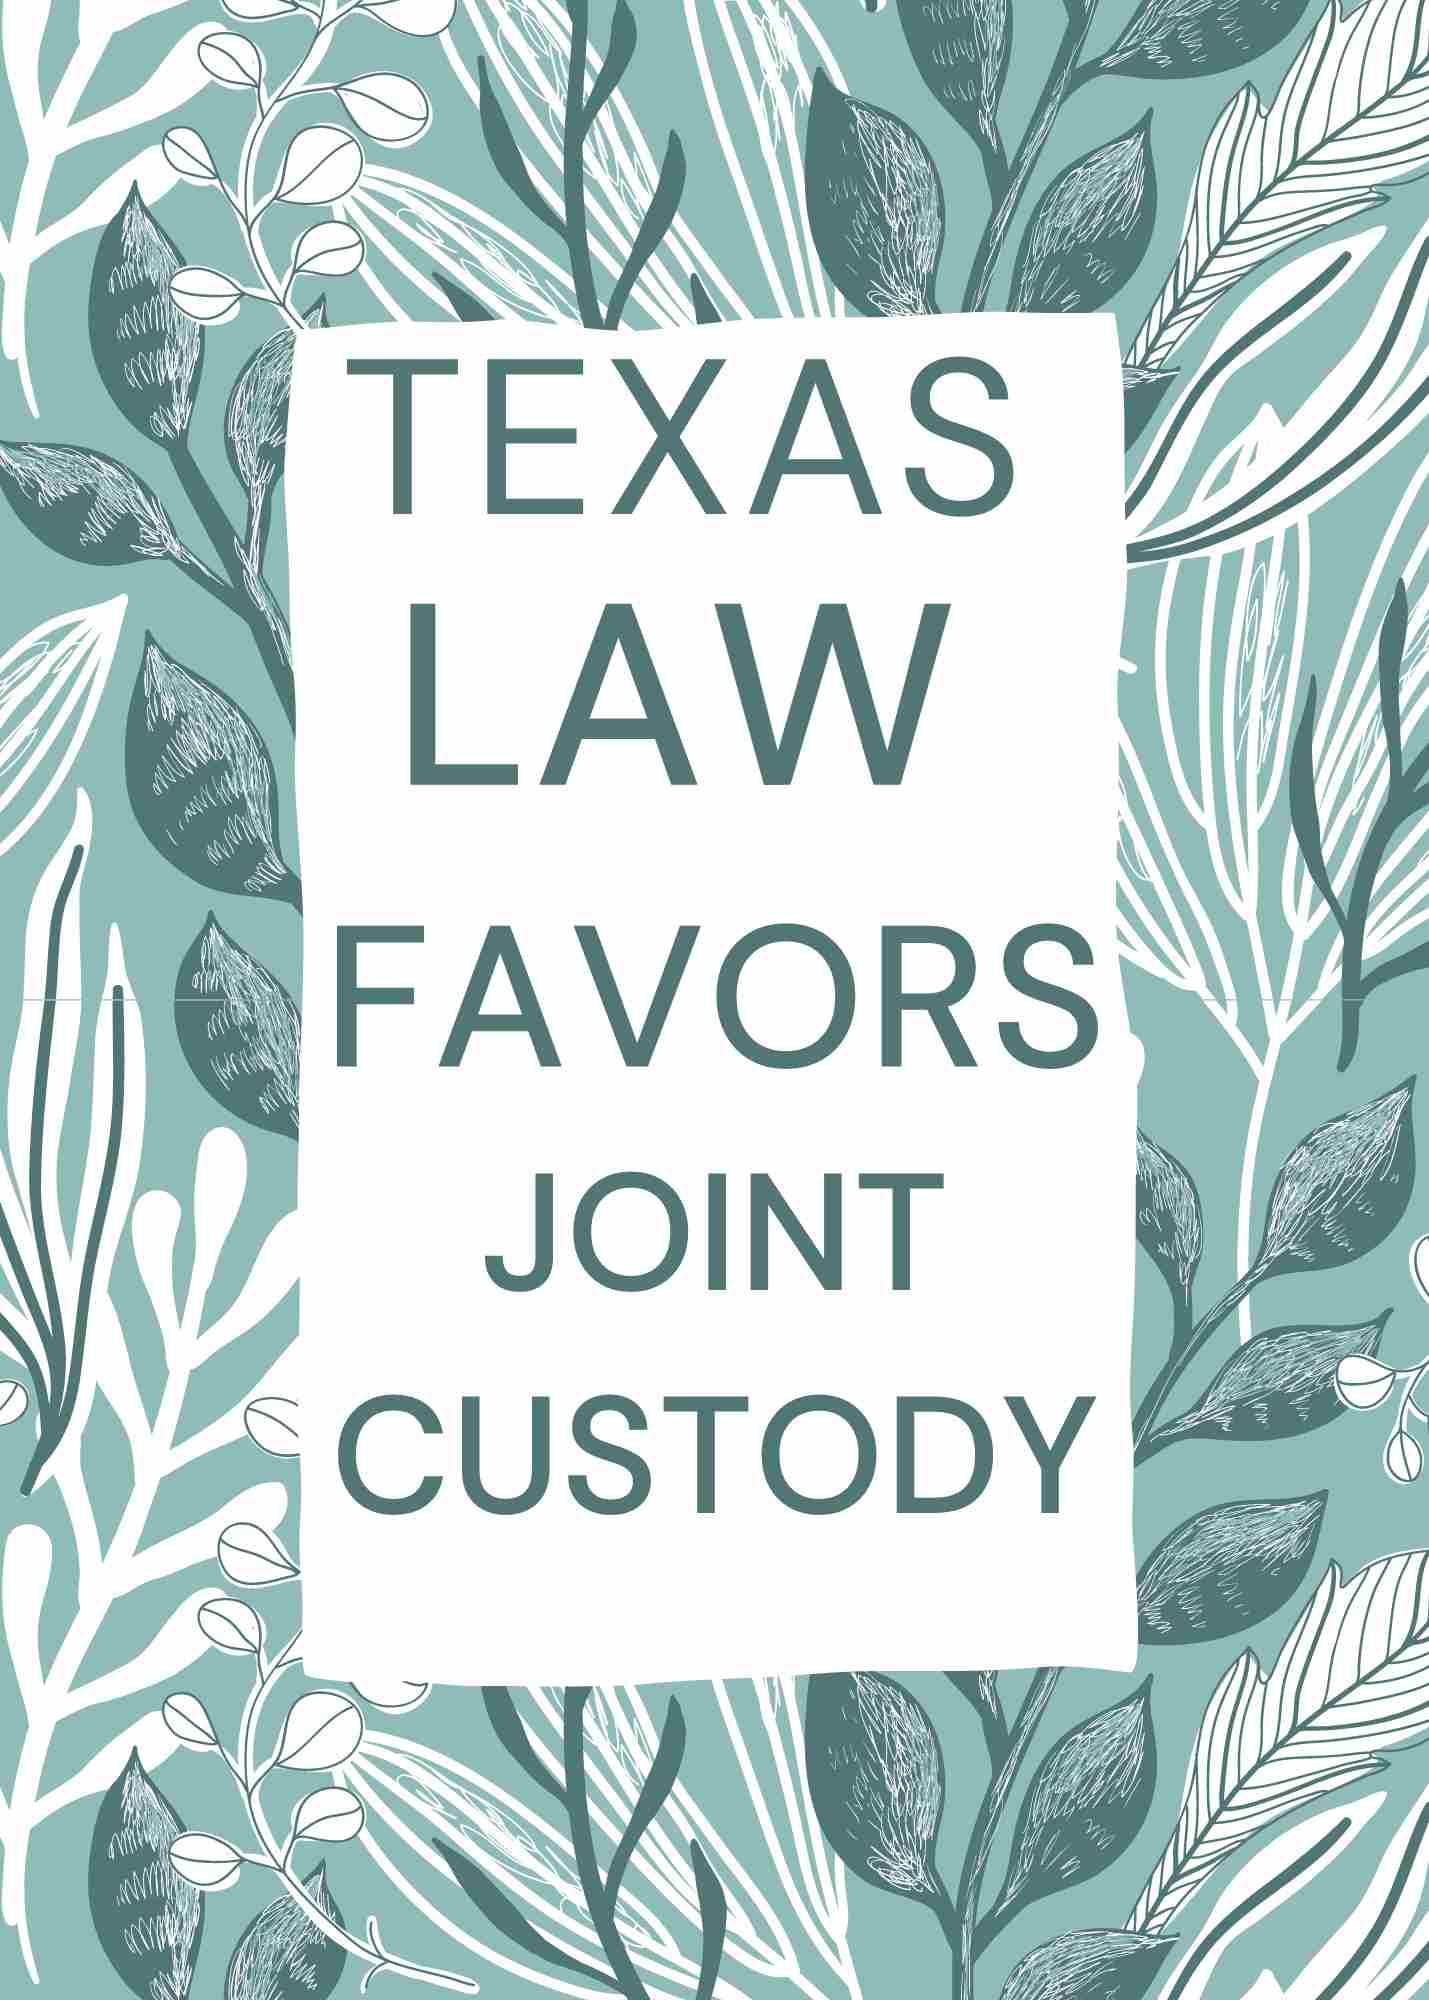 Informational poster highlighting that Texas law favors this arrangement, set against a botanical backdrop.